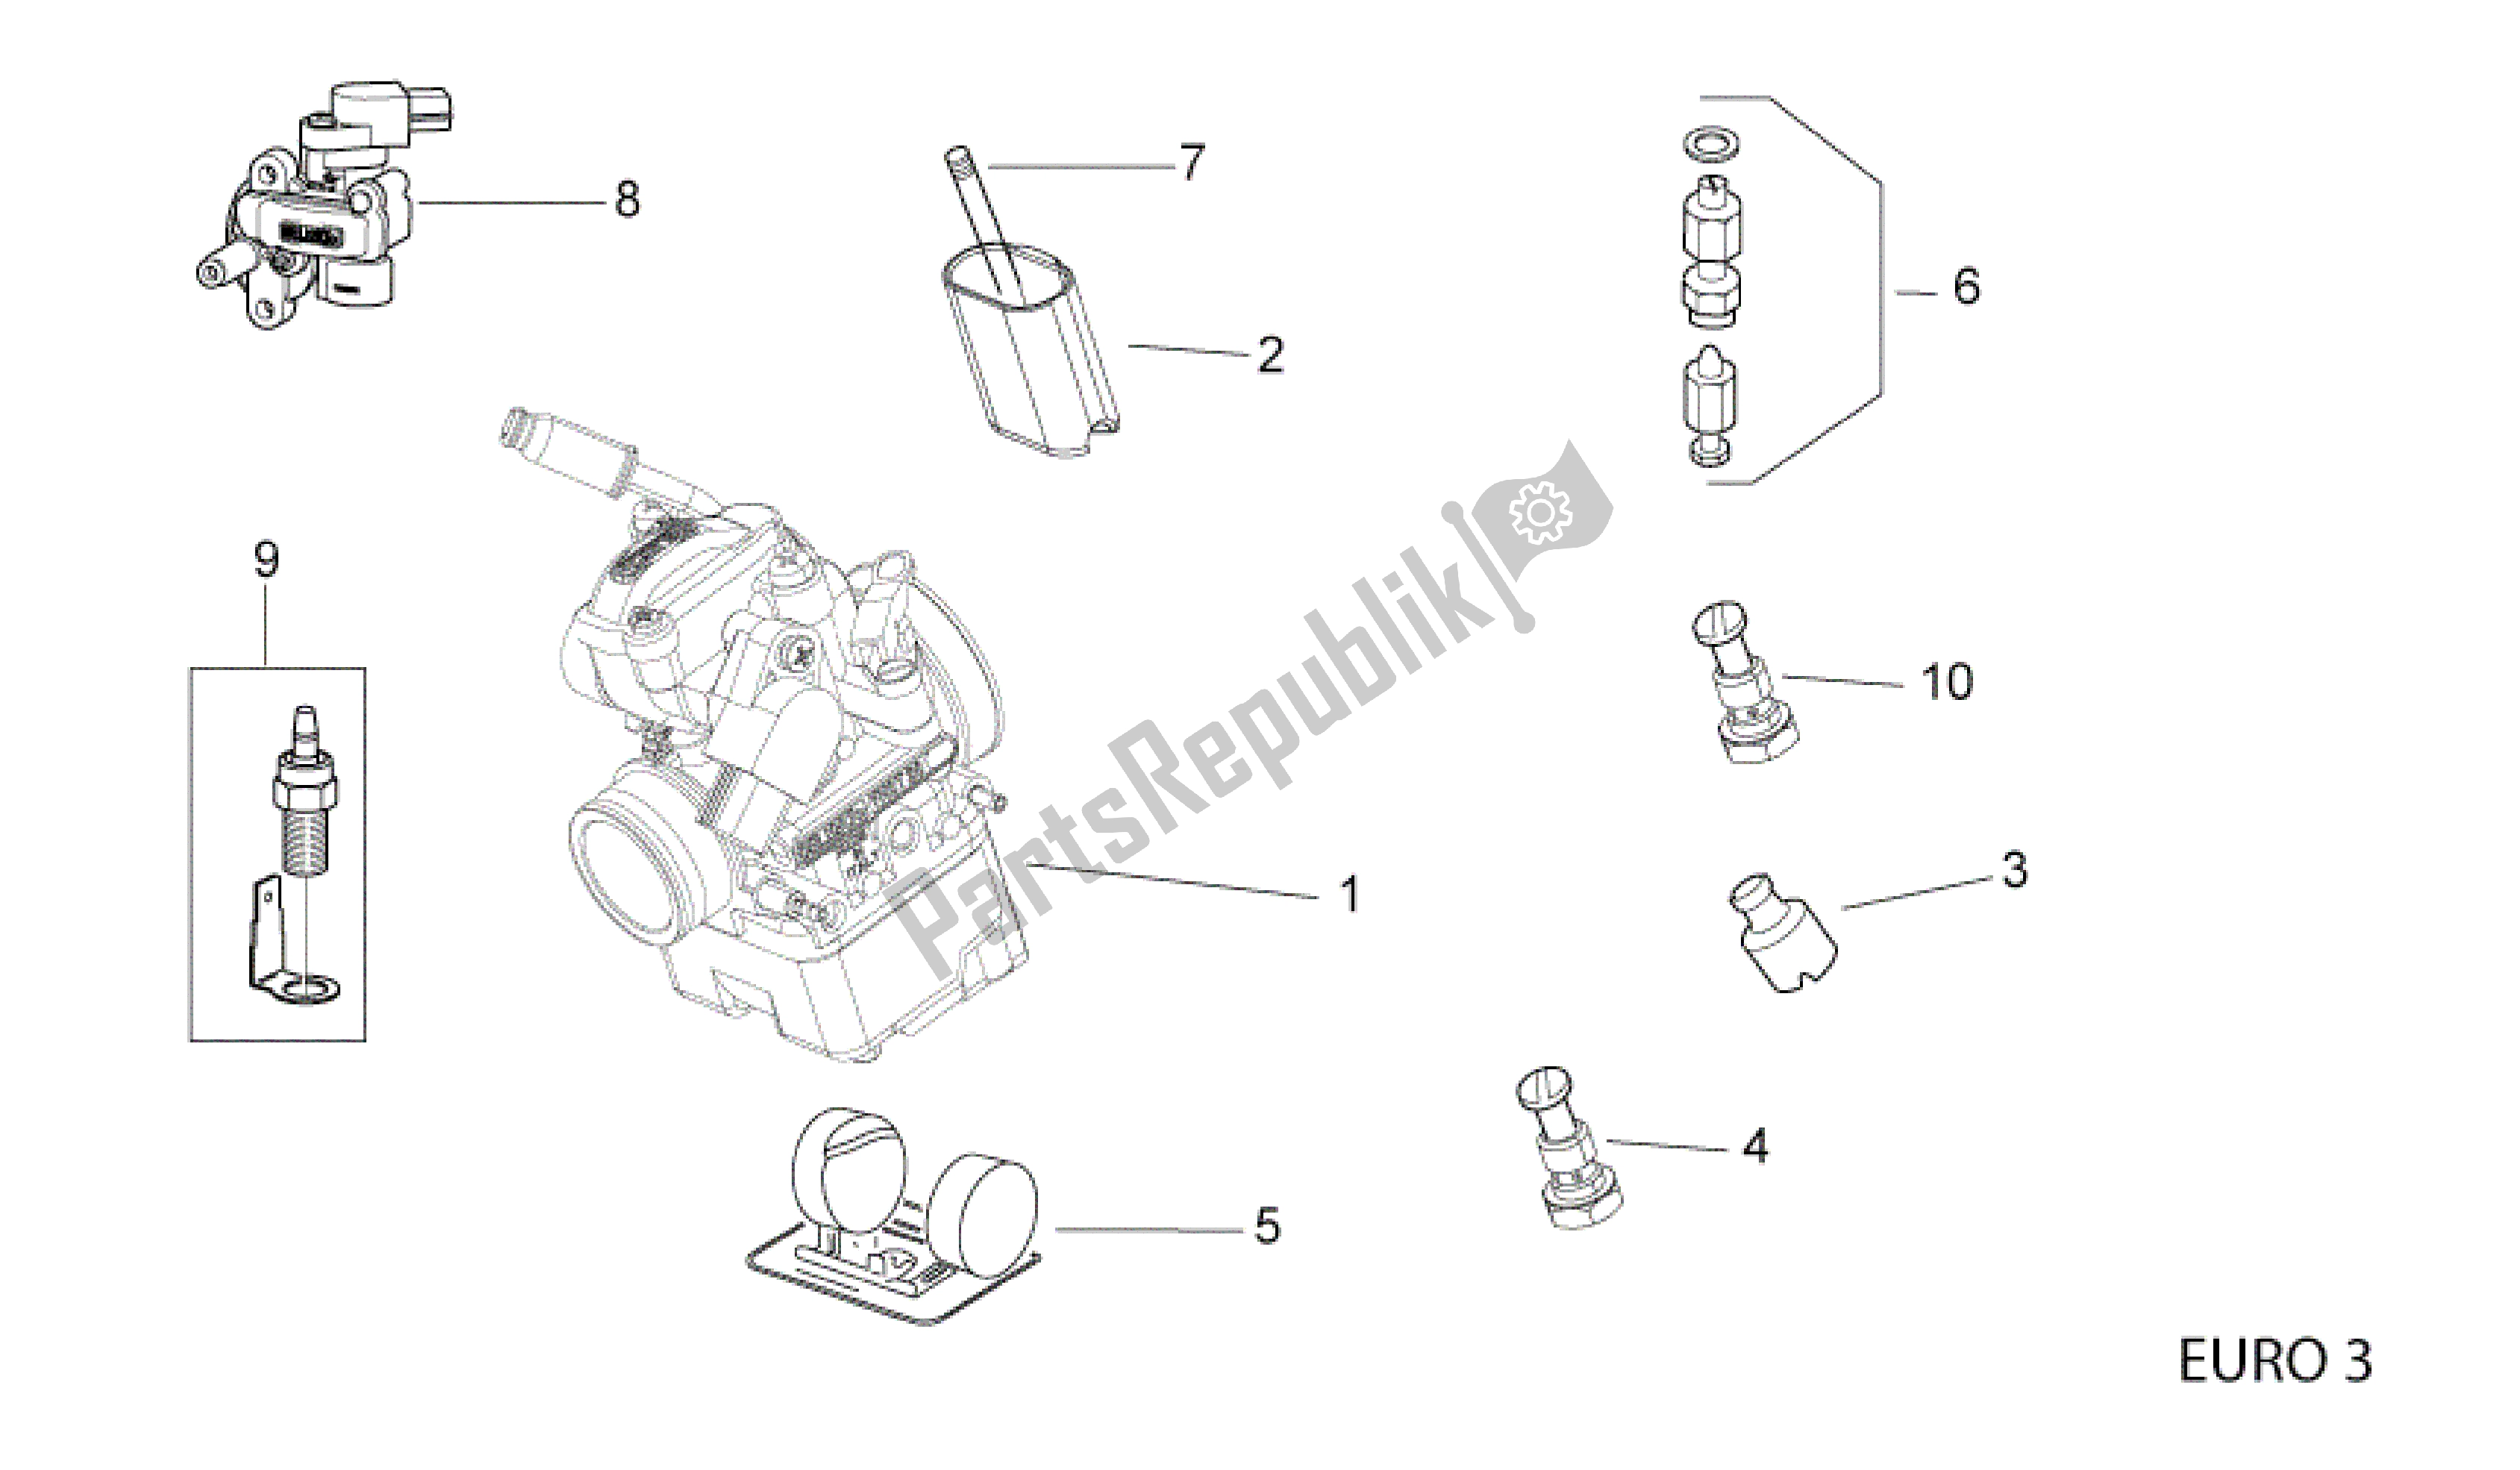 All parts for the Carburador Iiii of the Aprilia RS 125 2006 - 2010